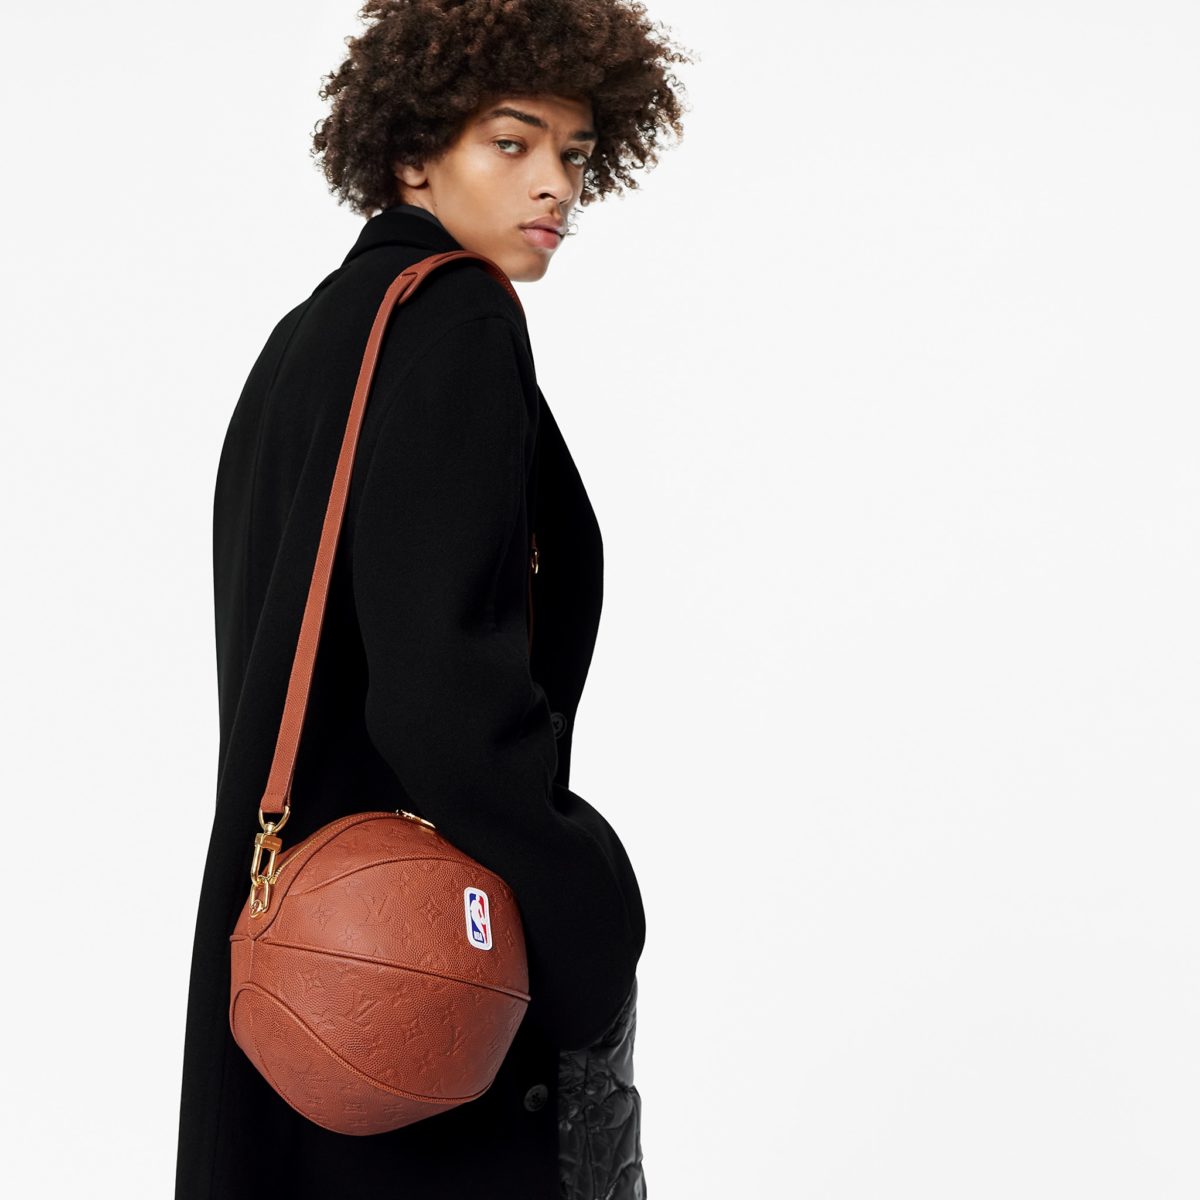 Louis Vuitton NBA Ball In Basket Leather Bag Release